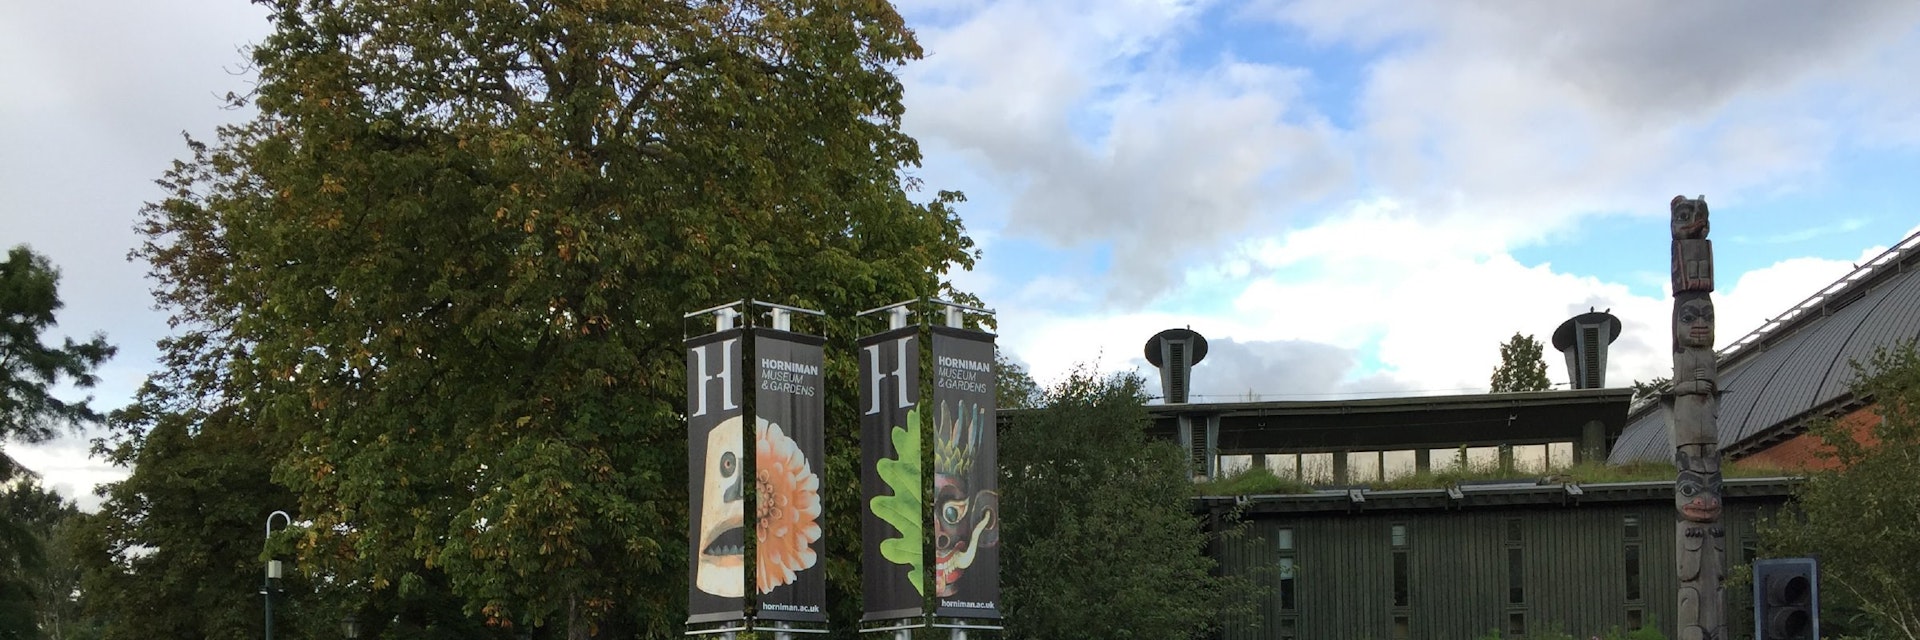 The entrance to the Horniman Museum